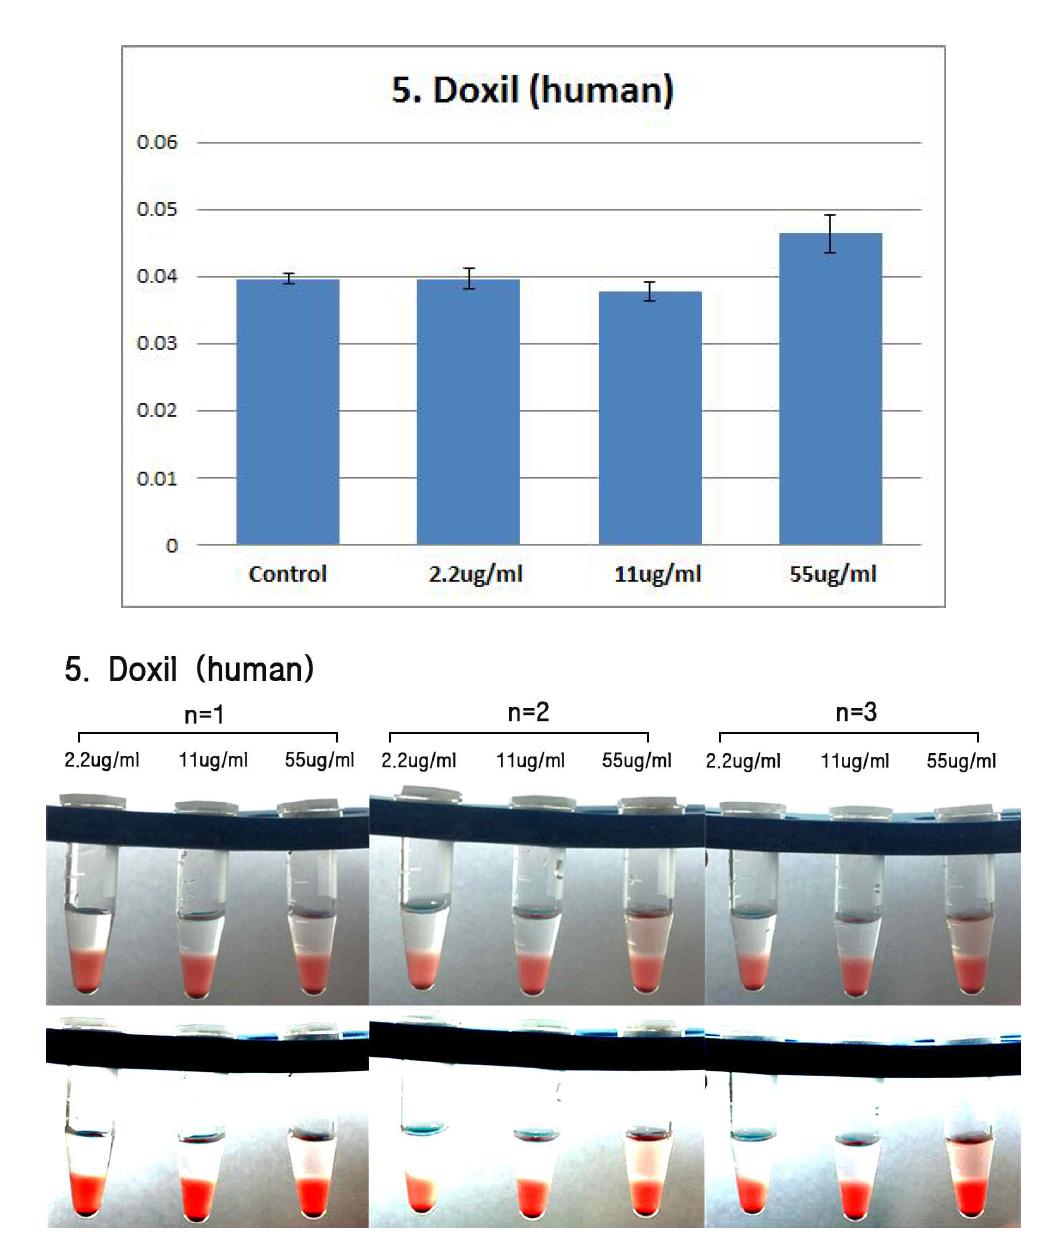 Effects of Doxil on human erythrocyte. Erythrocyte were treated with Doxil (55 ug/ml, 11 ug/ml, 2.2 ug/ml) for 2hrs. The results are presented as mean ± SE